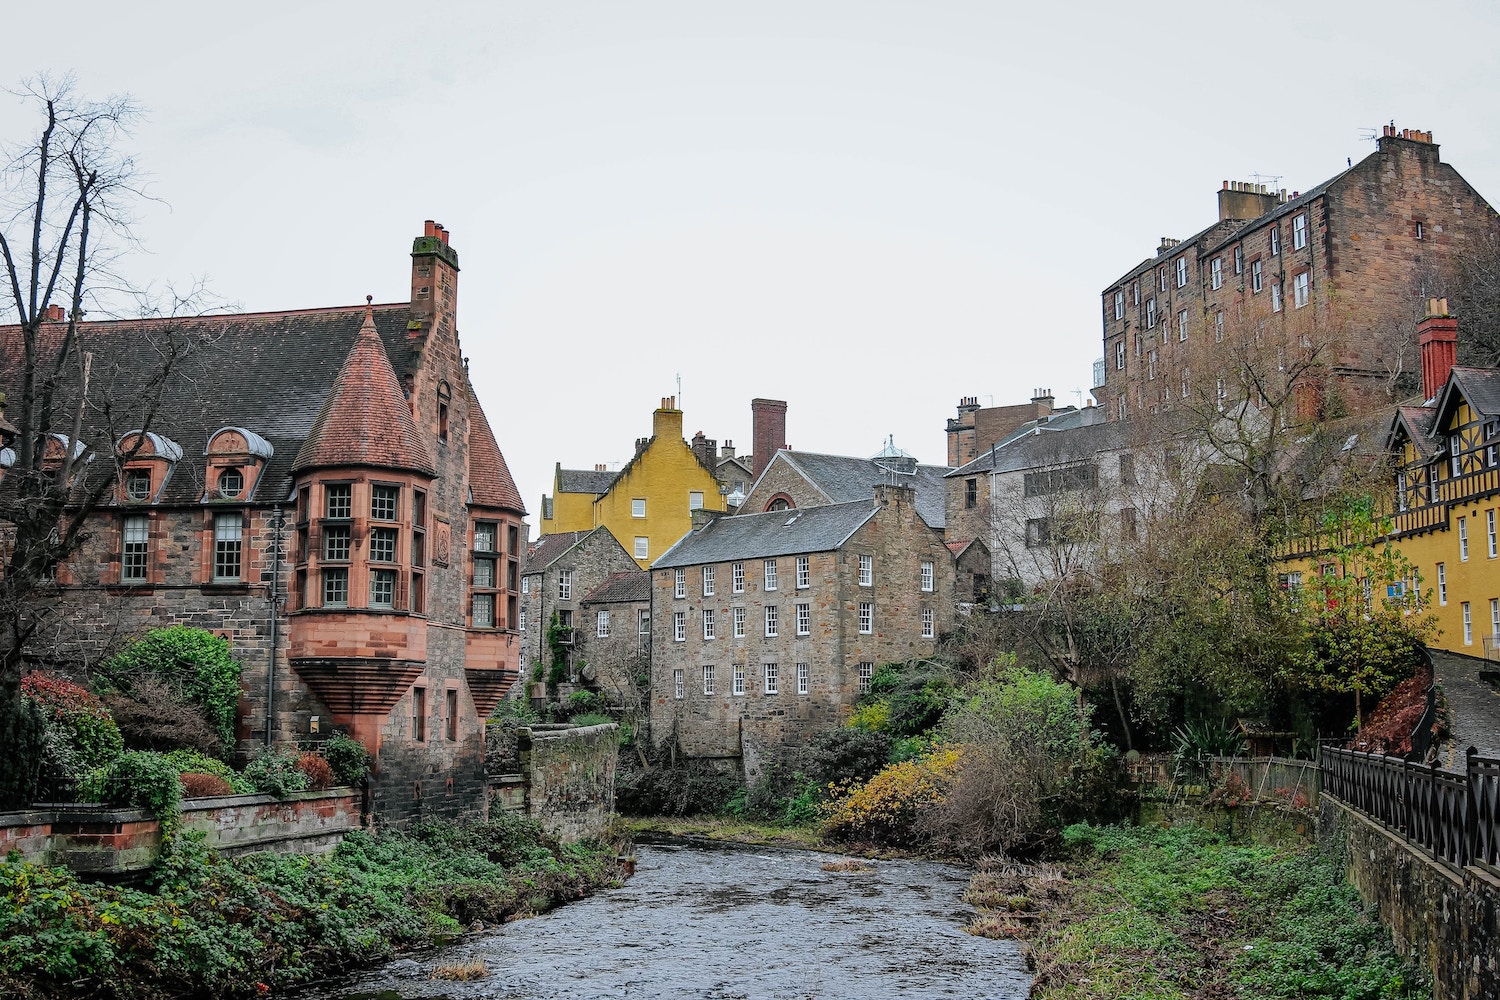 Potential interest rate hikes cast shadow over Scotland's housing market